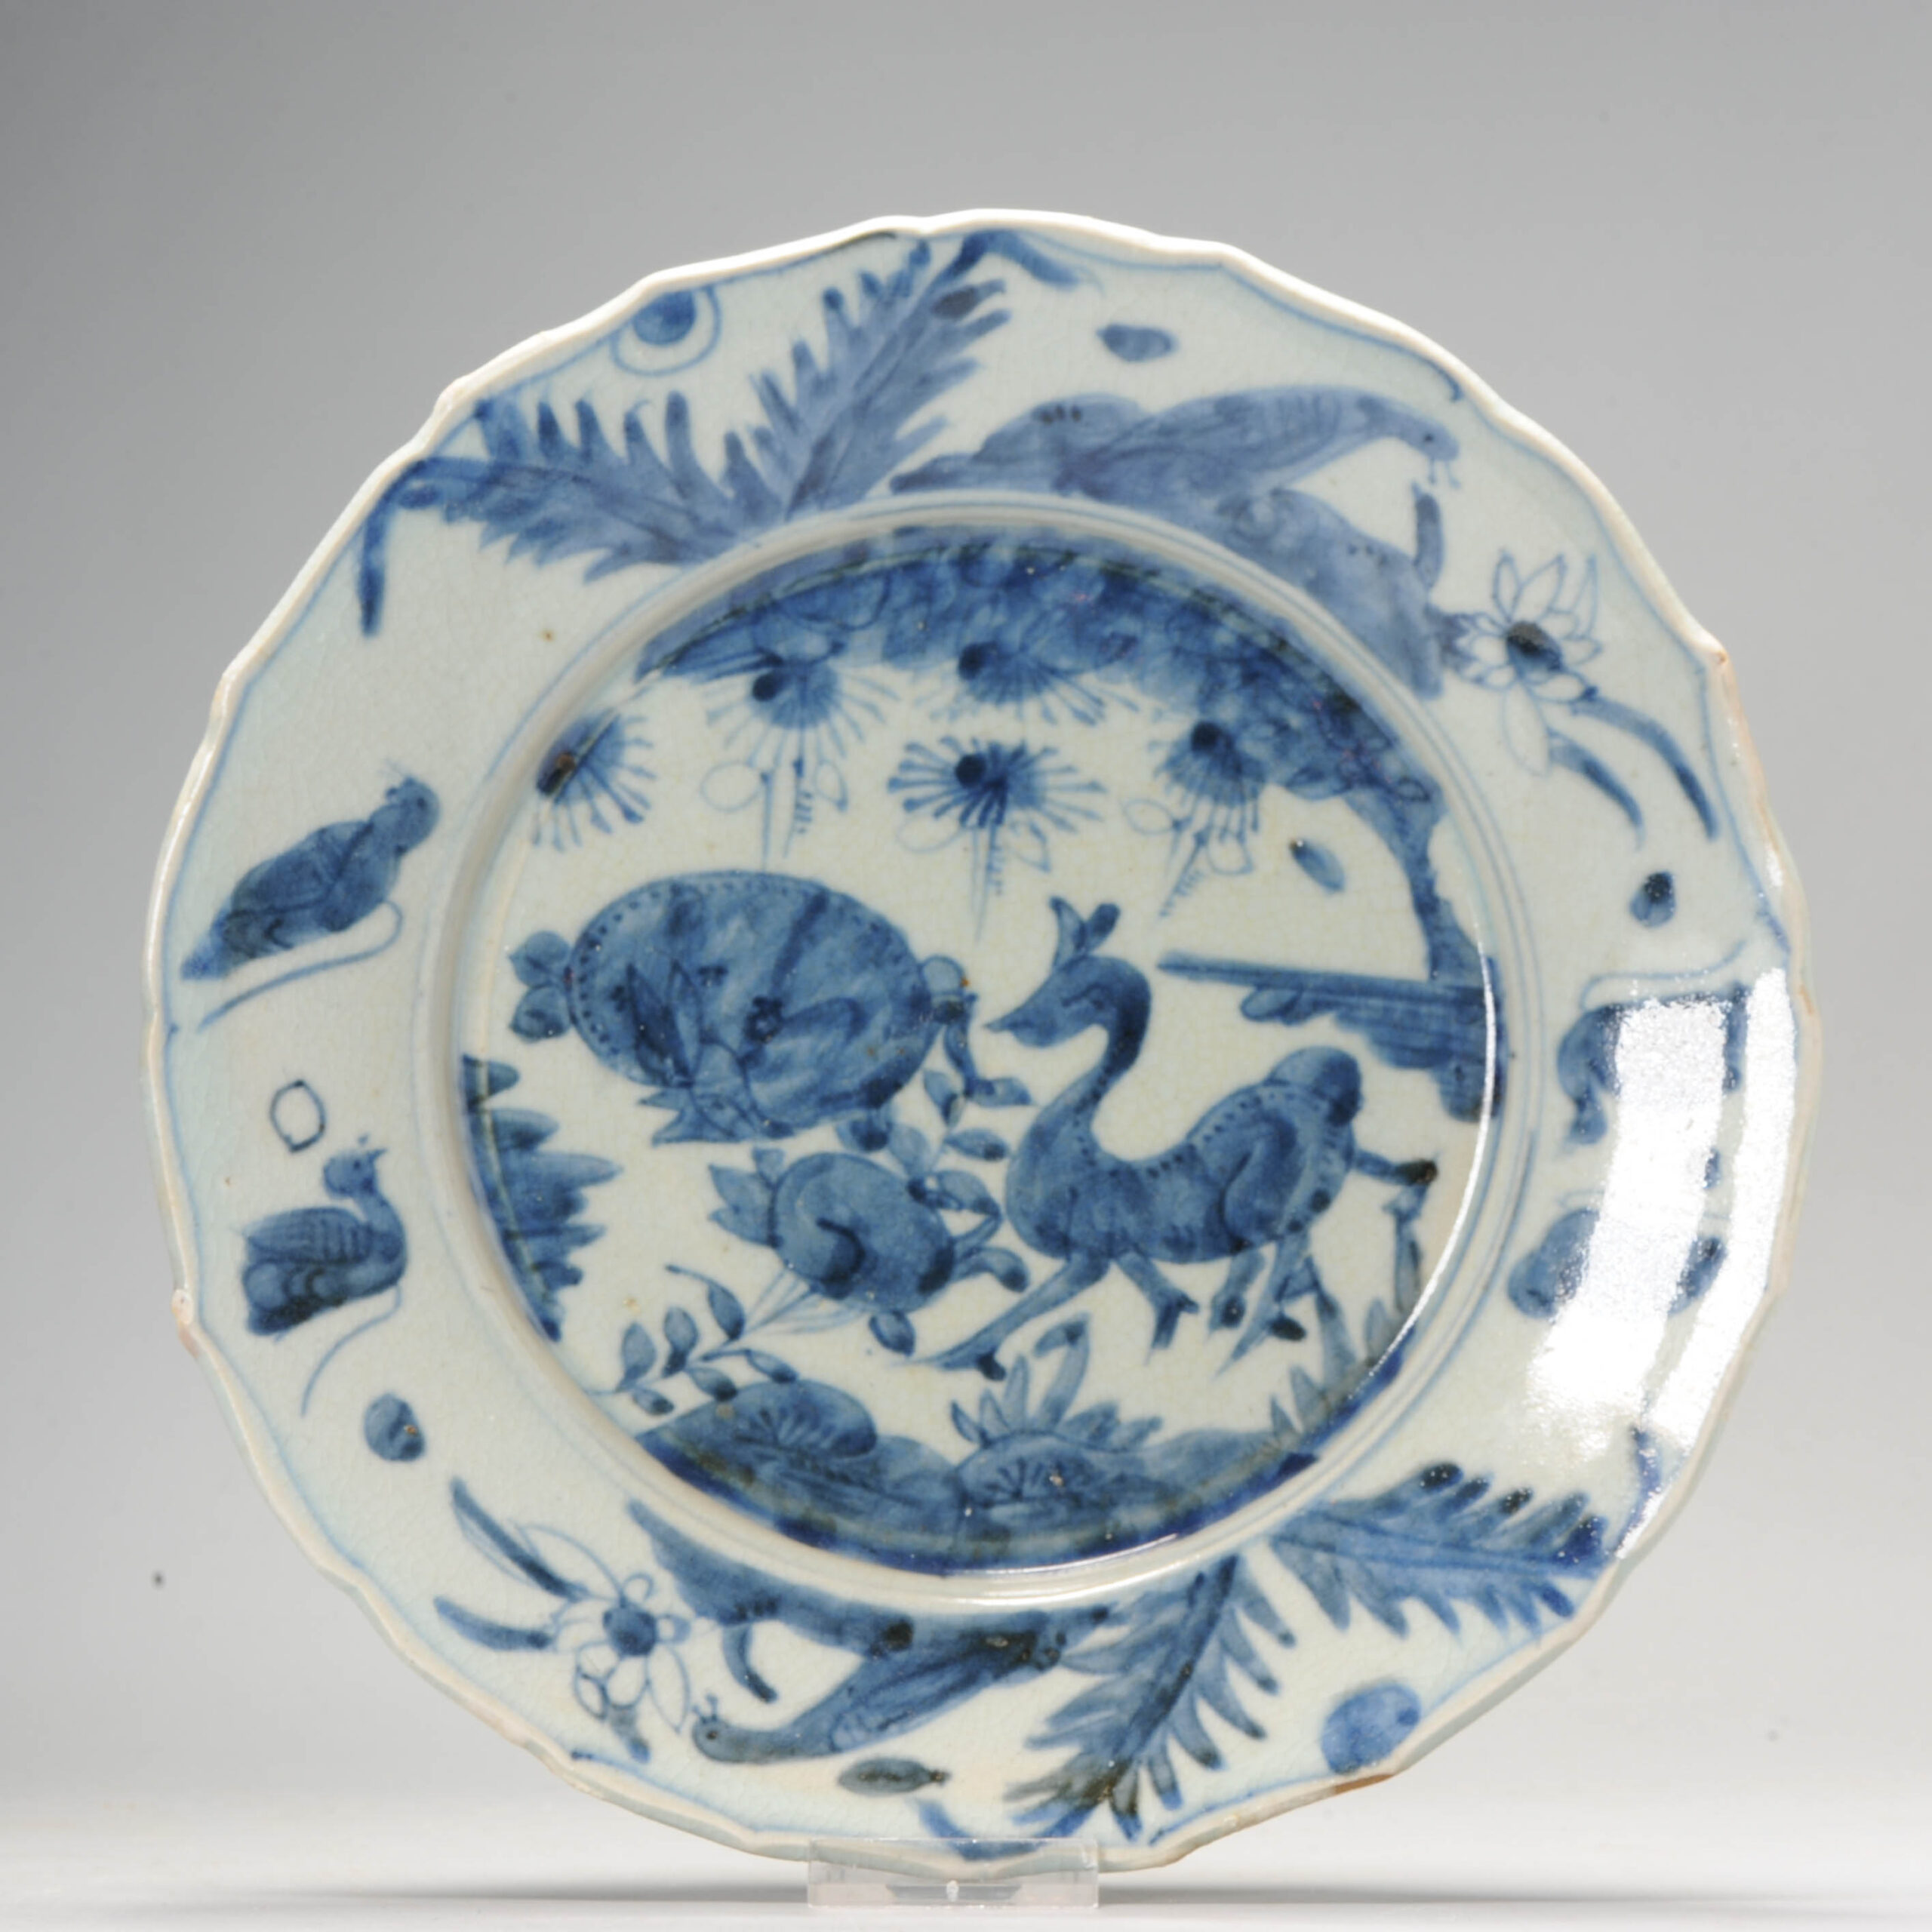 1103 A Chinese porcelain Ming or Ming Style deer dish. Swatow or Jingdezhen